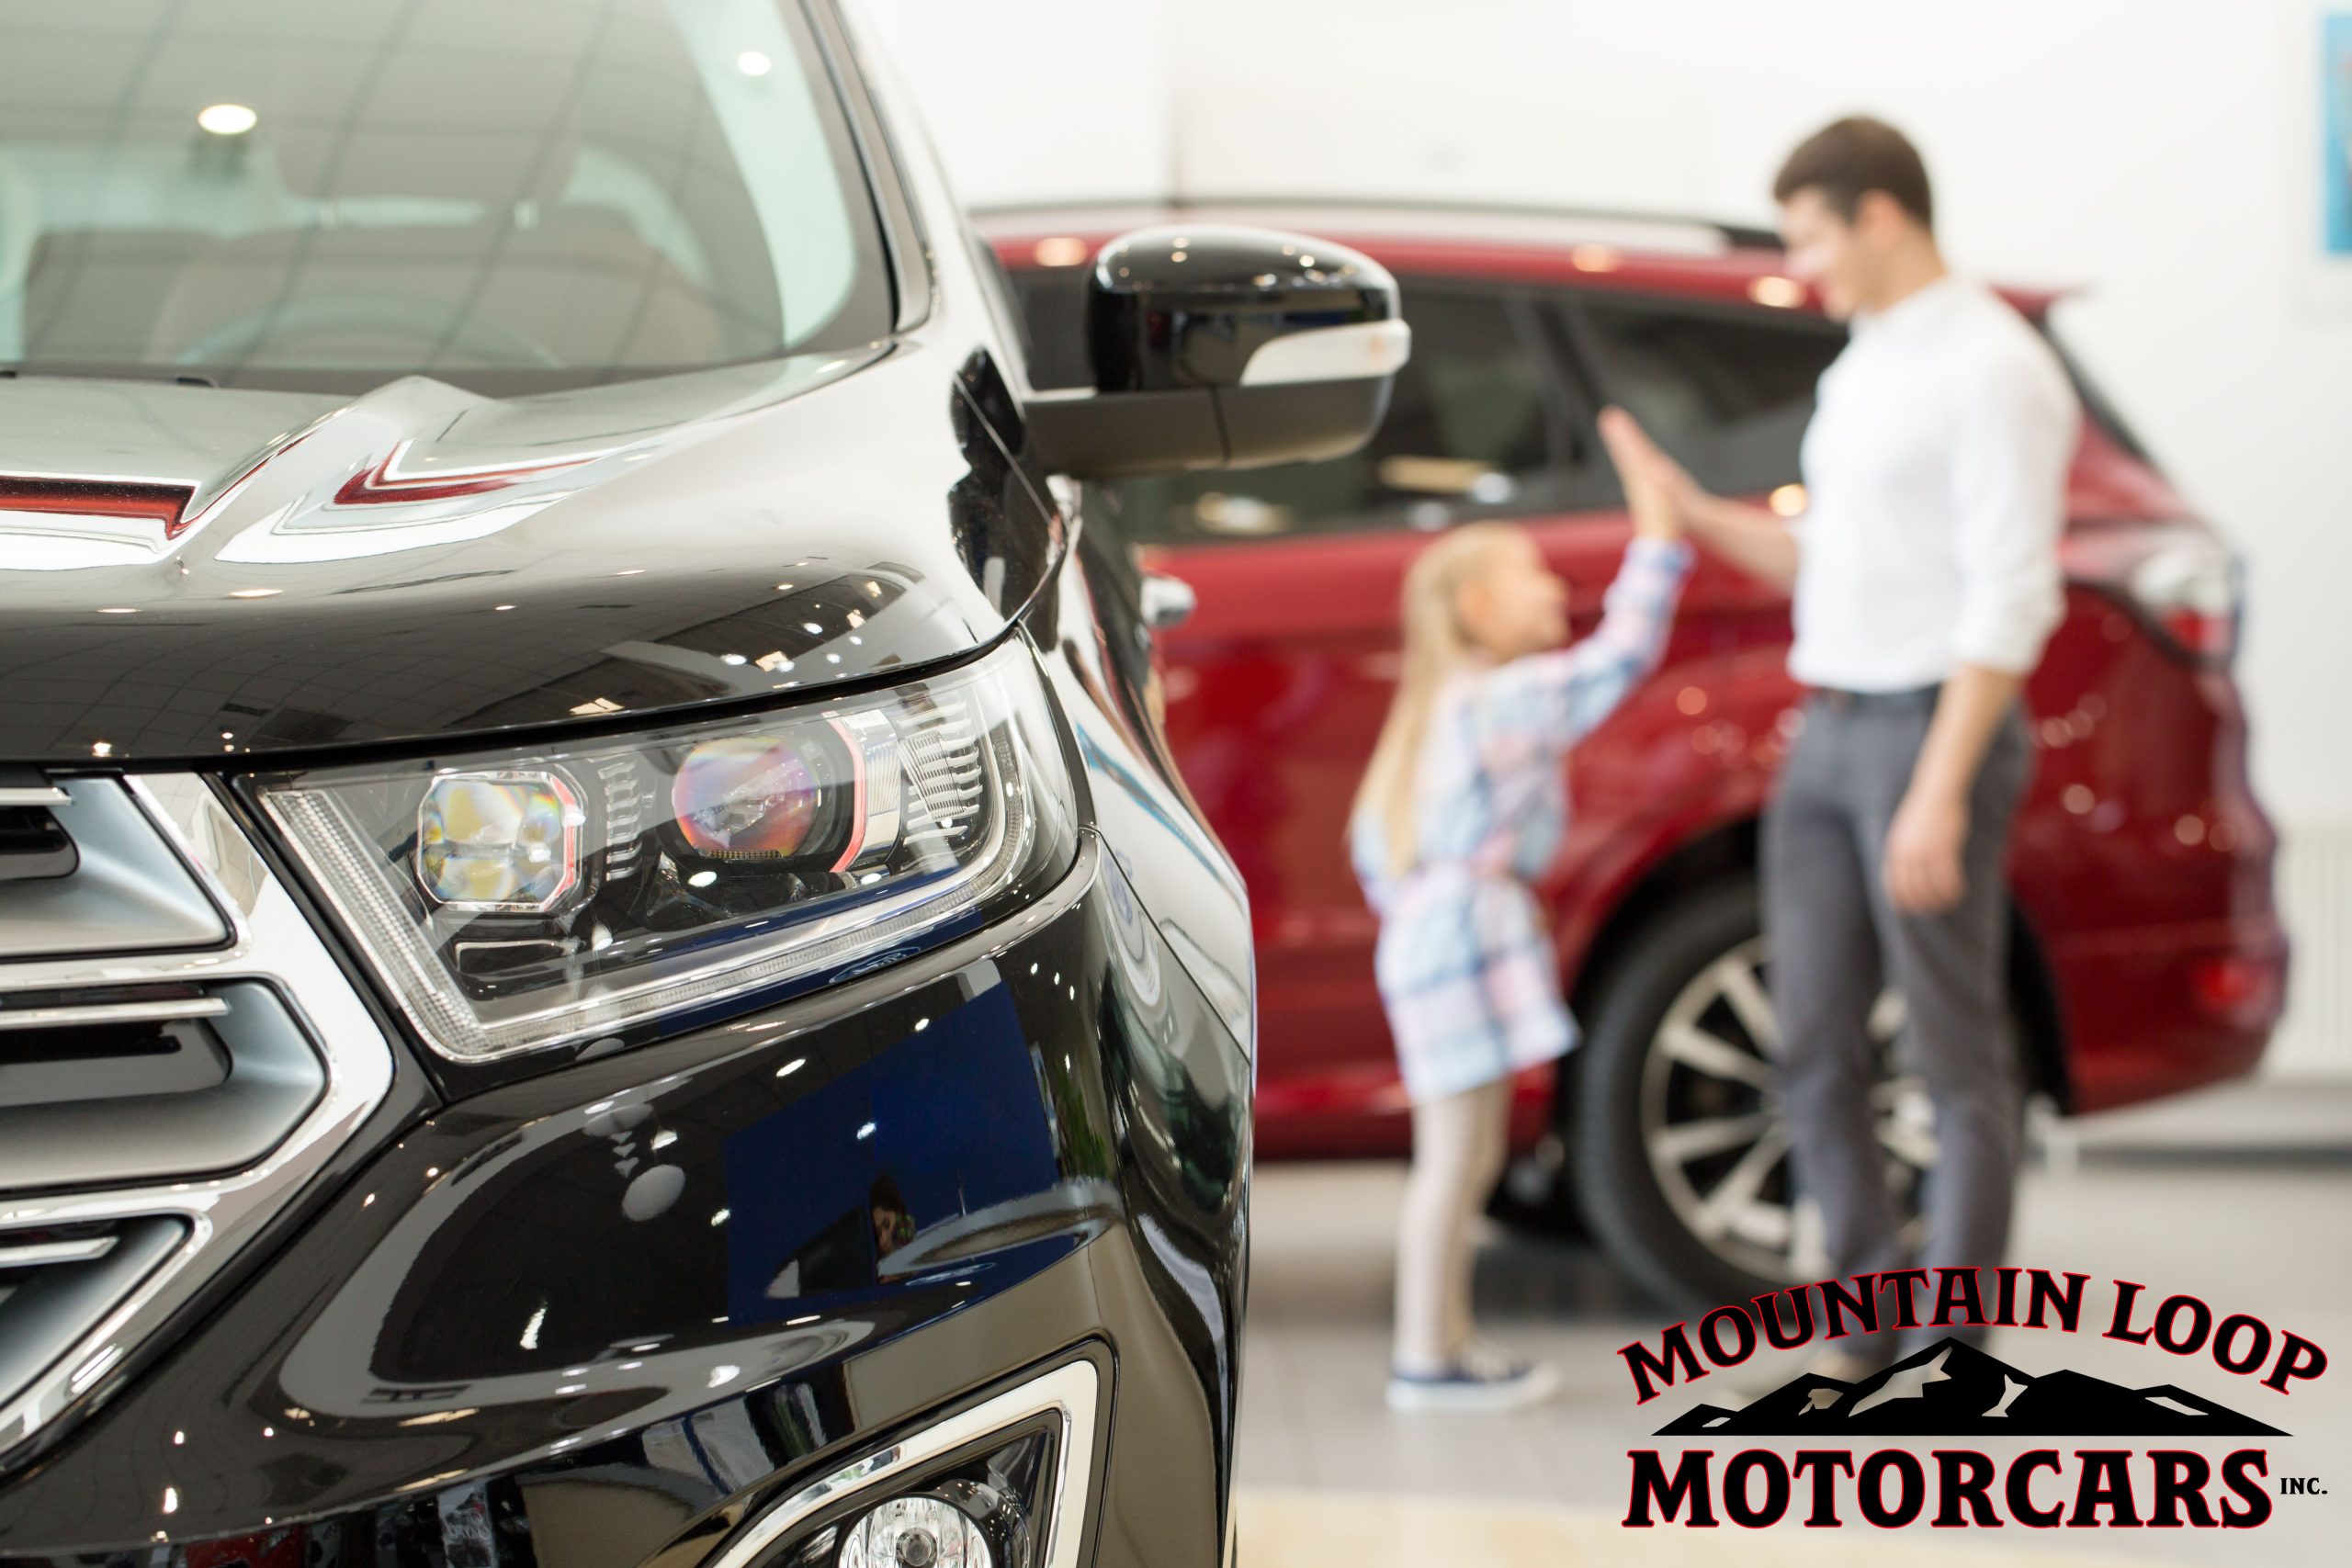 Find Your Next Dream Car at Mountain Loop Motorcars